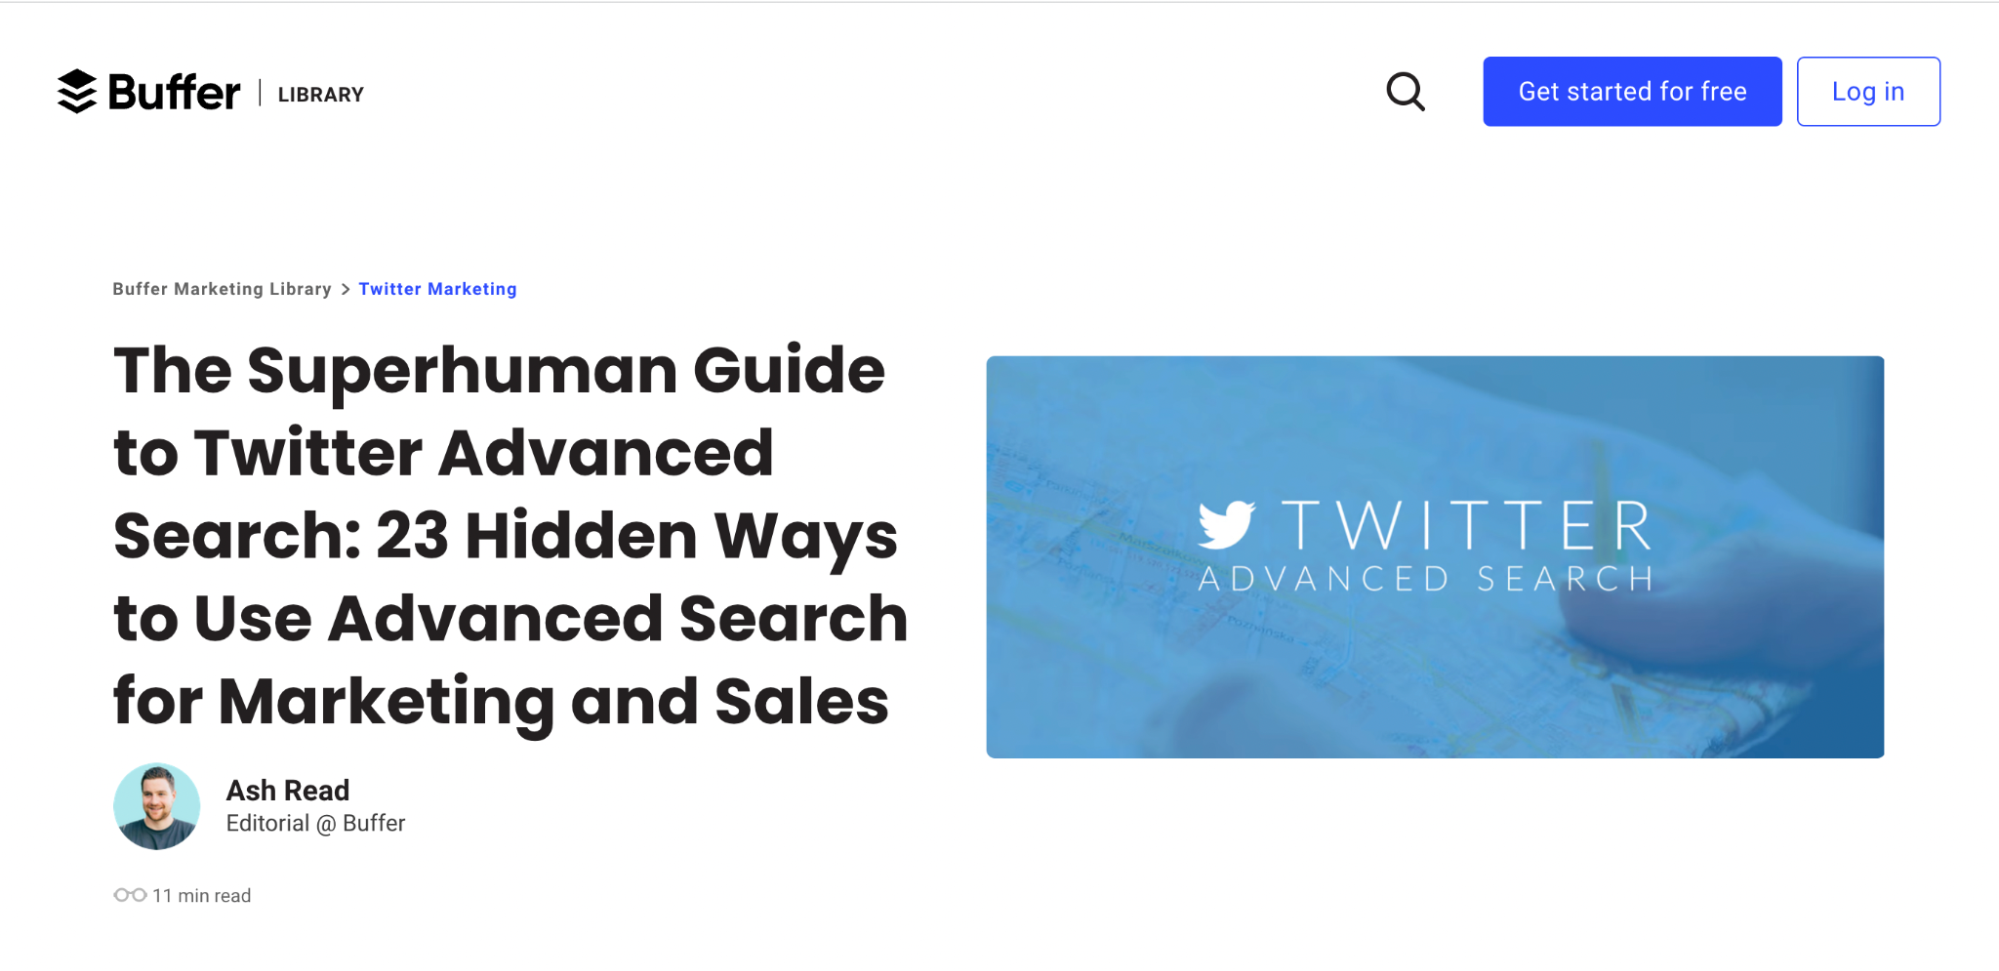 Buffer - The Superhuman Guide to Twitter Advanced Search